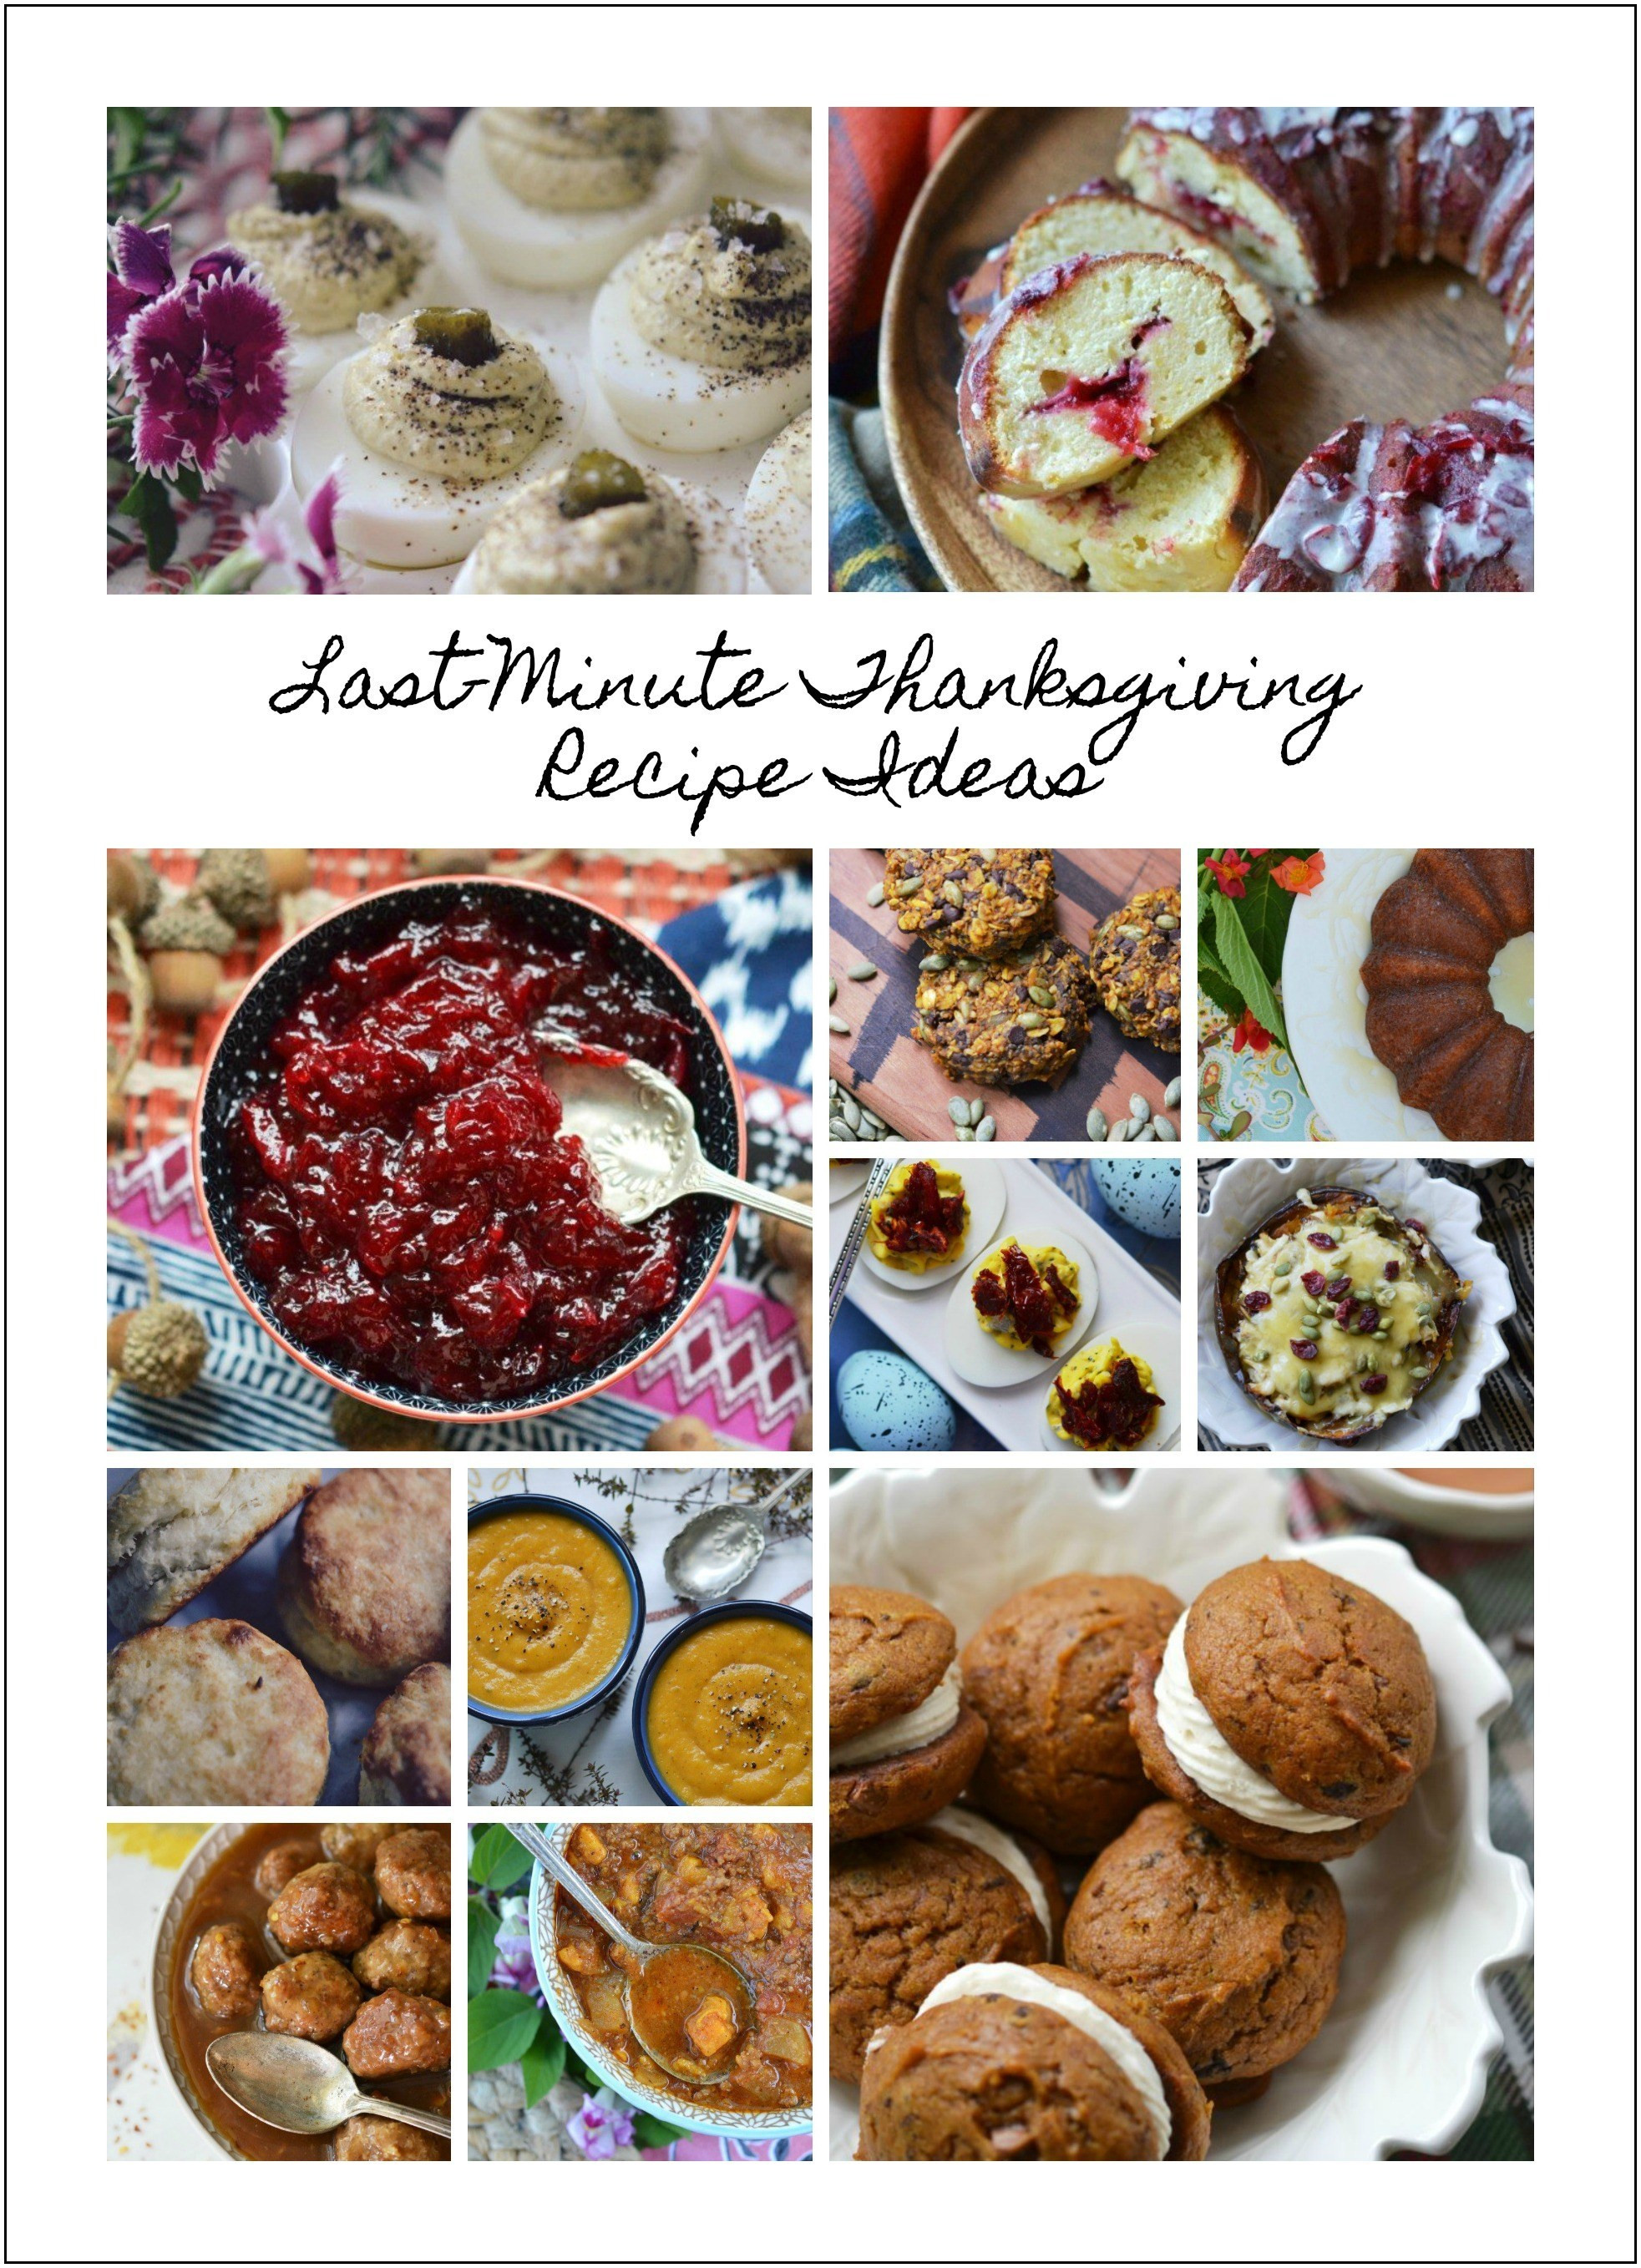 Thanksgiving Dinner Without Turkey
 Last Minute Thanksgiving Recipe Ideas – 2017